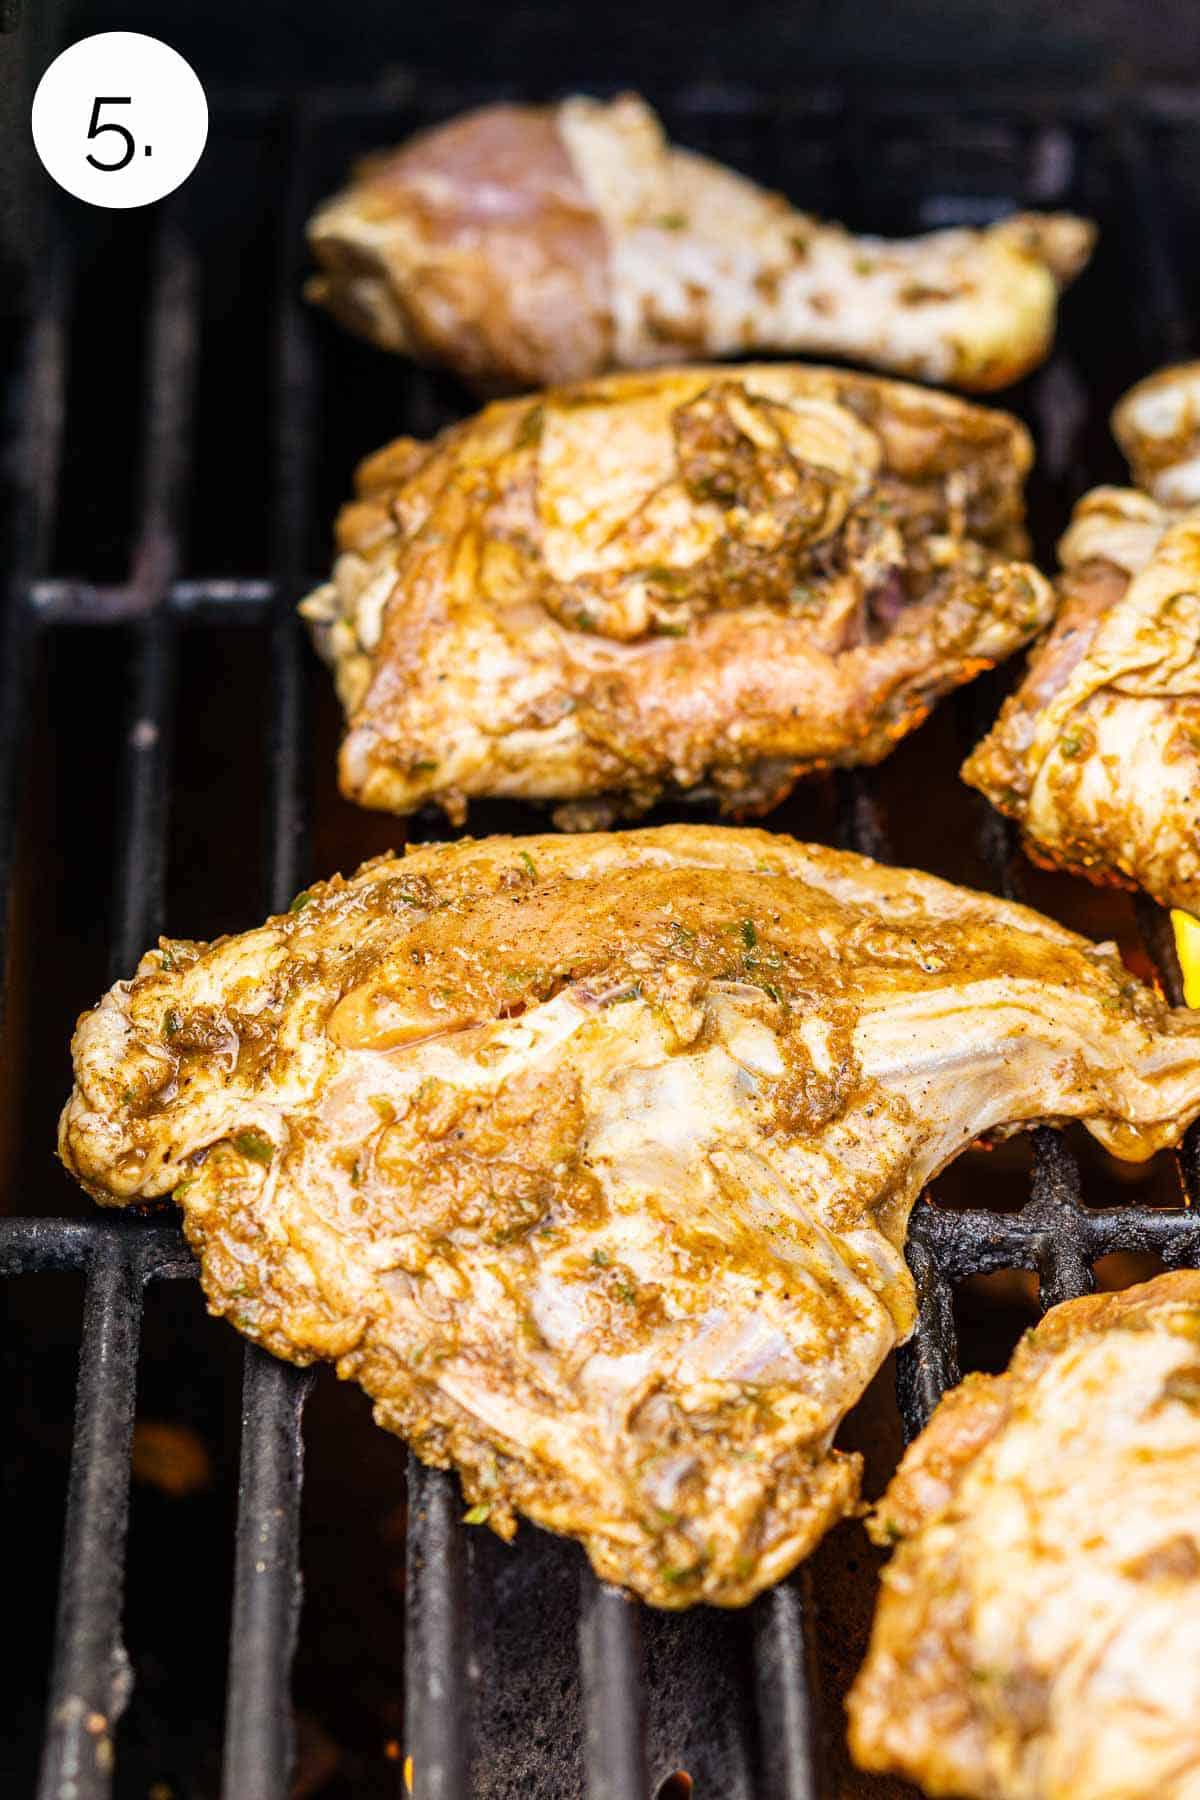 The chicken with the skin side down on a hot grill before closing the lid.